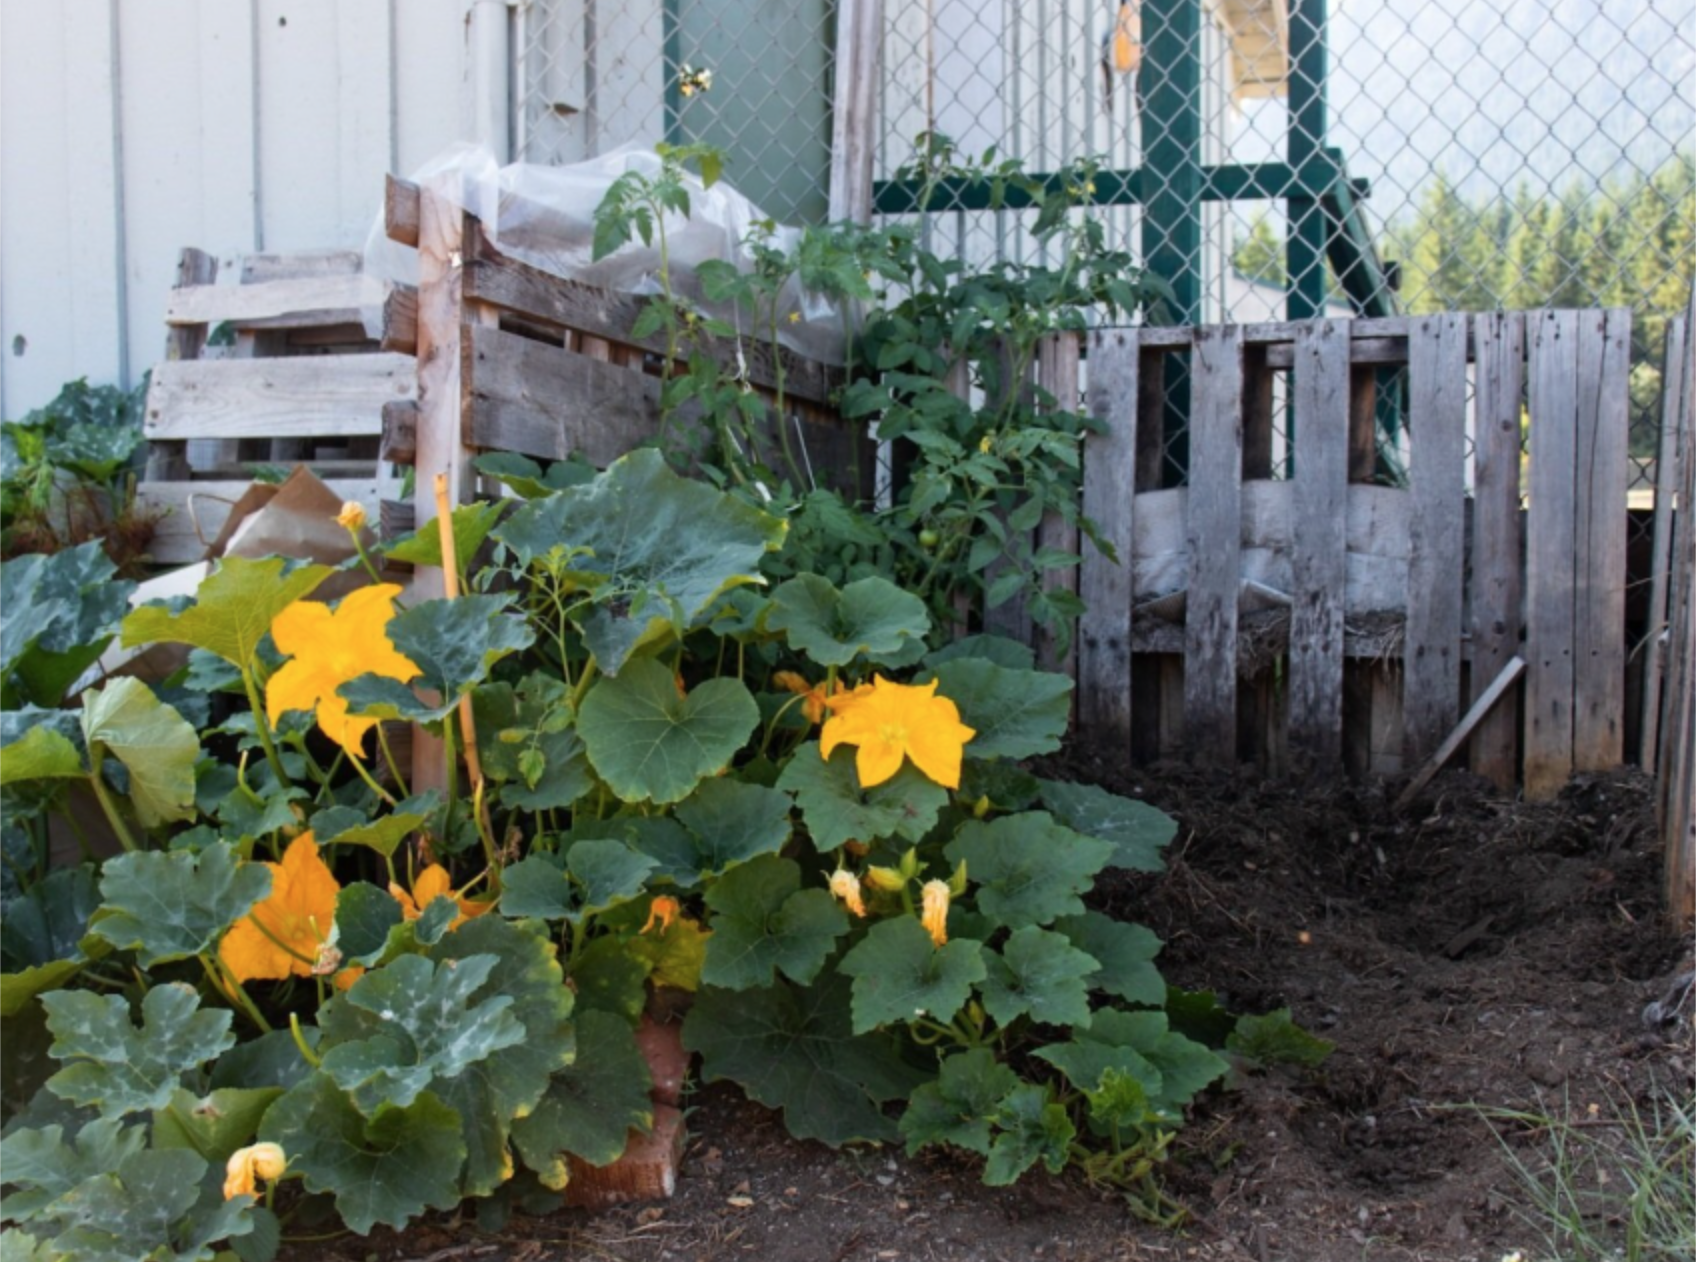  A surprise squash. We have 3 rotational compost piles that allow us to separate ready-to-use soil and organic matter that is still breaking down. 